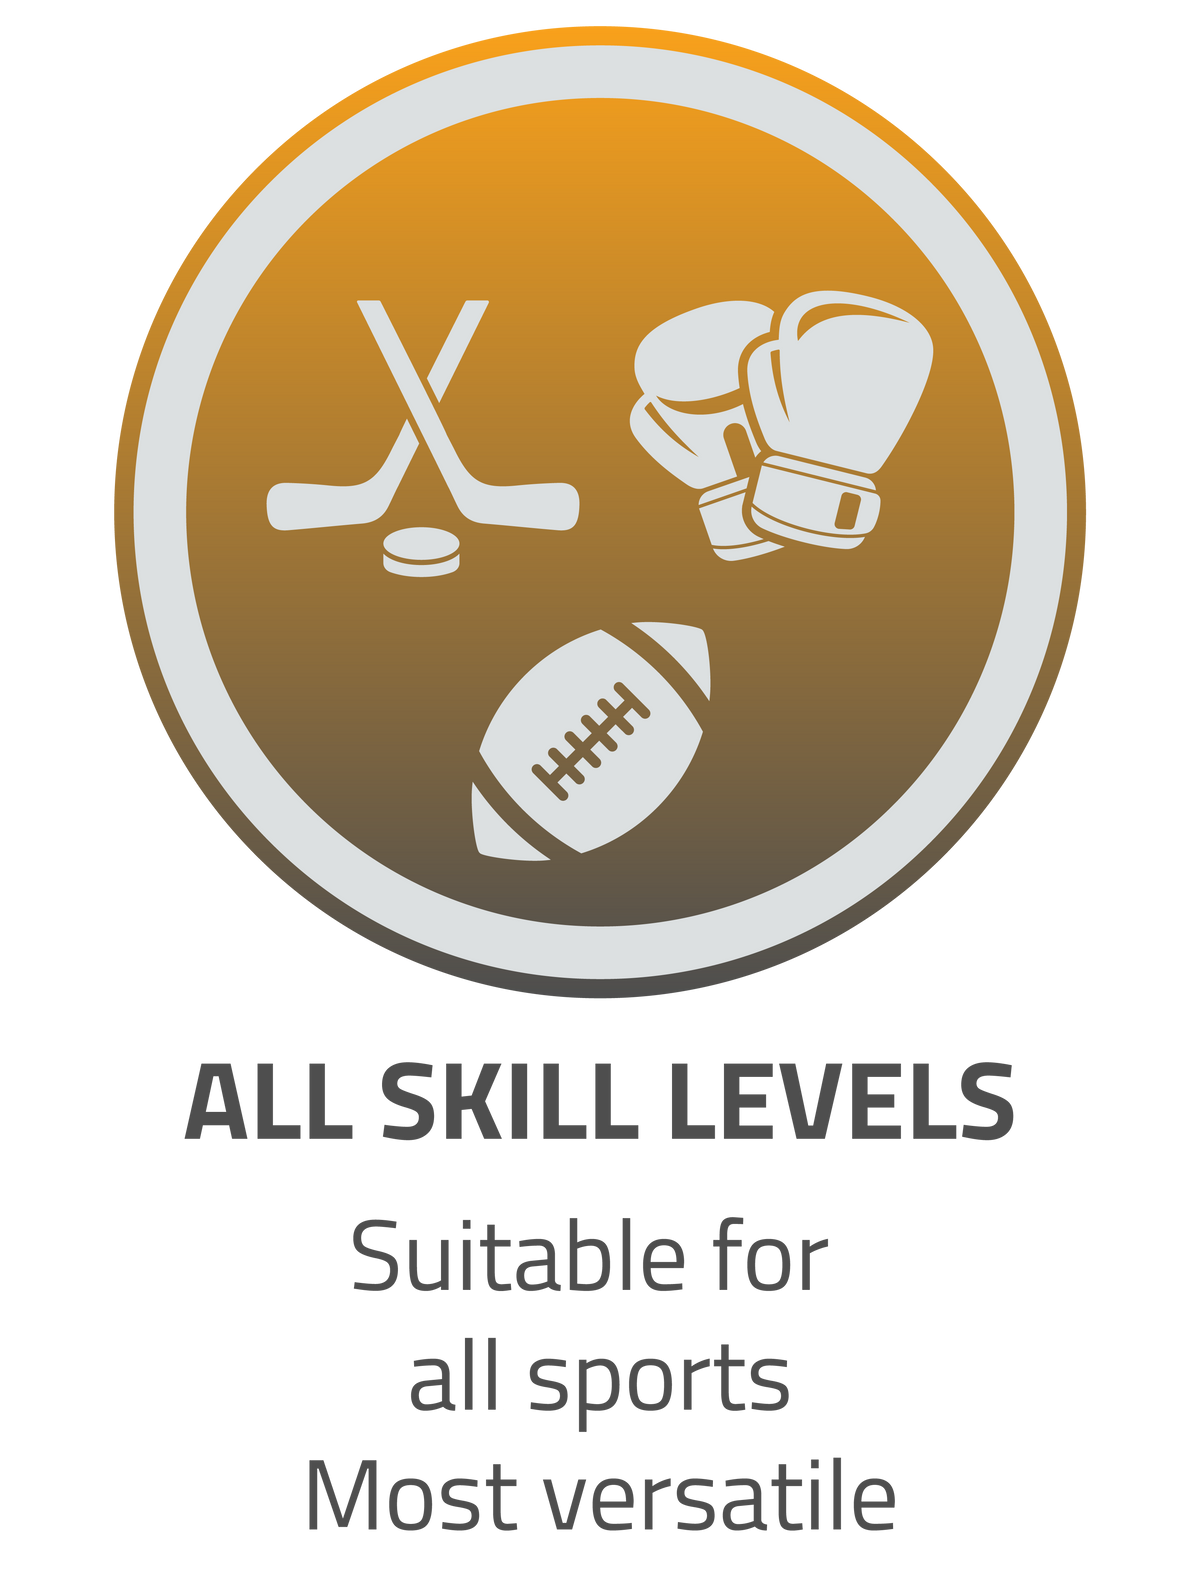 All skill levels suitable for all sports most versatile